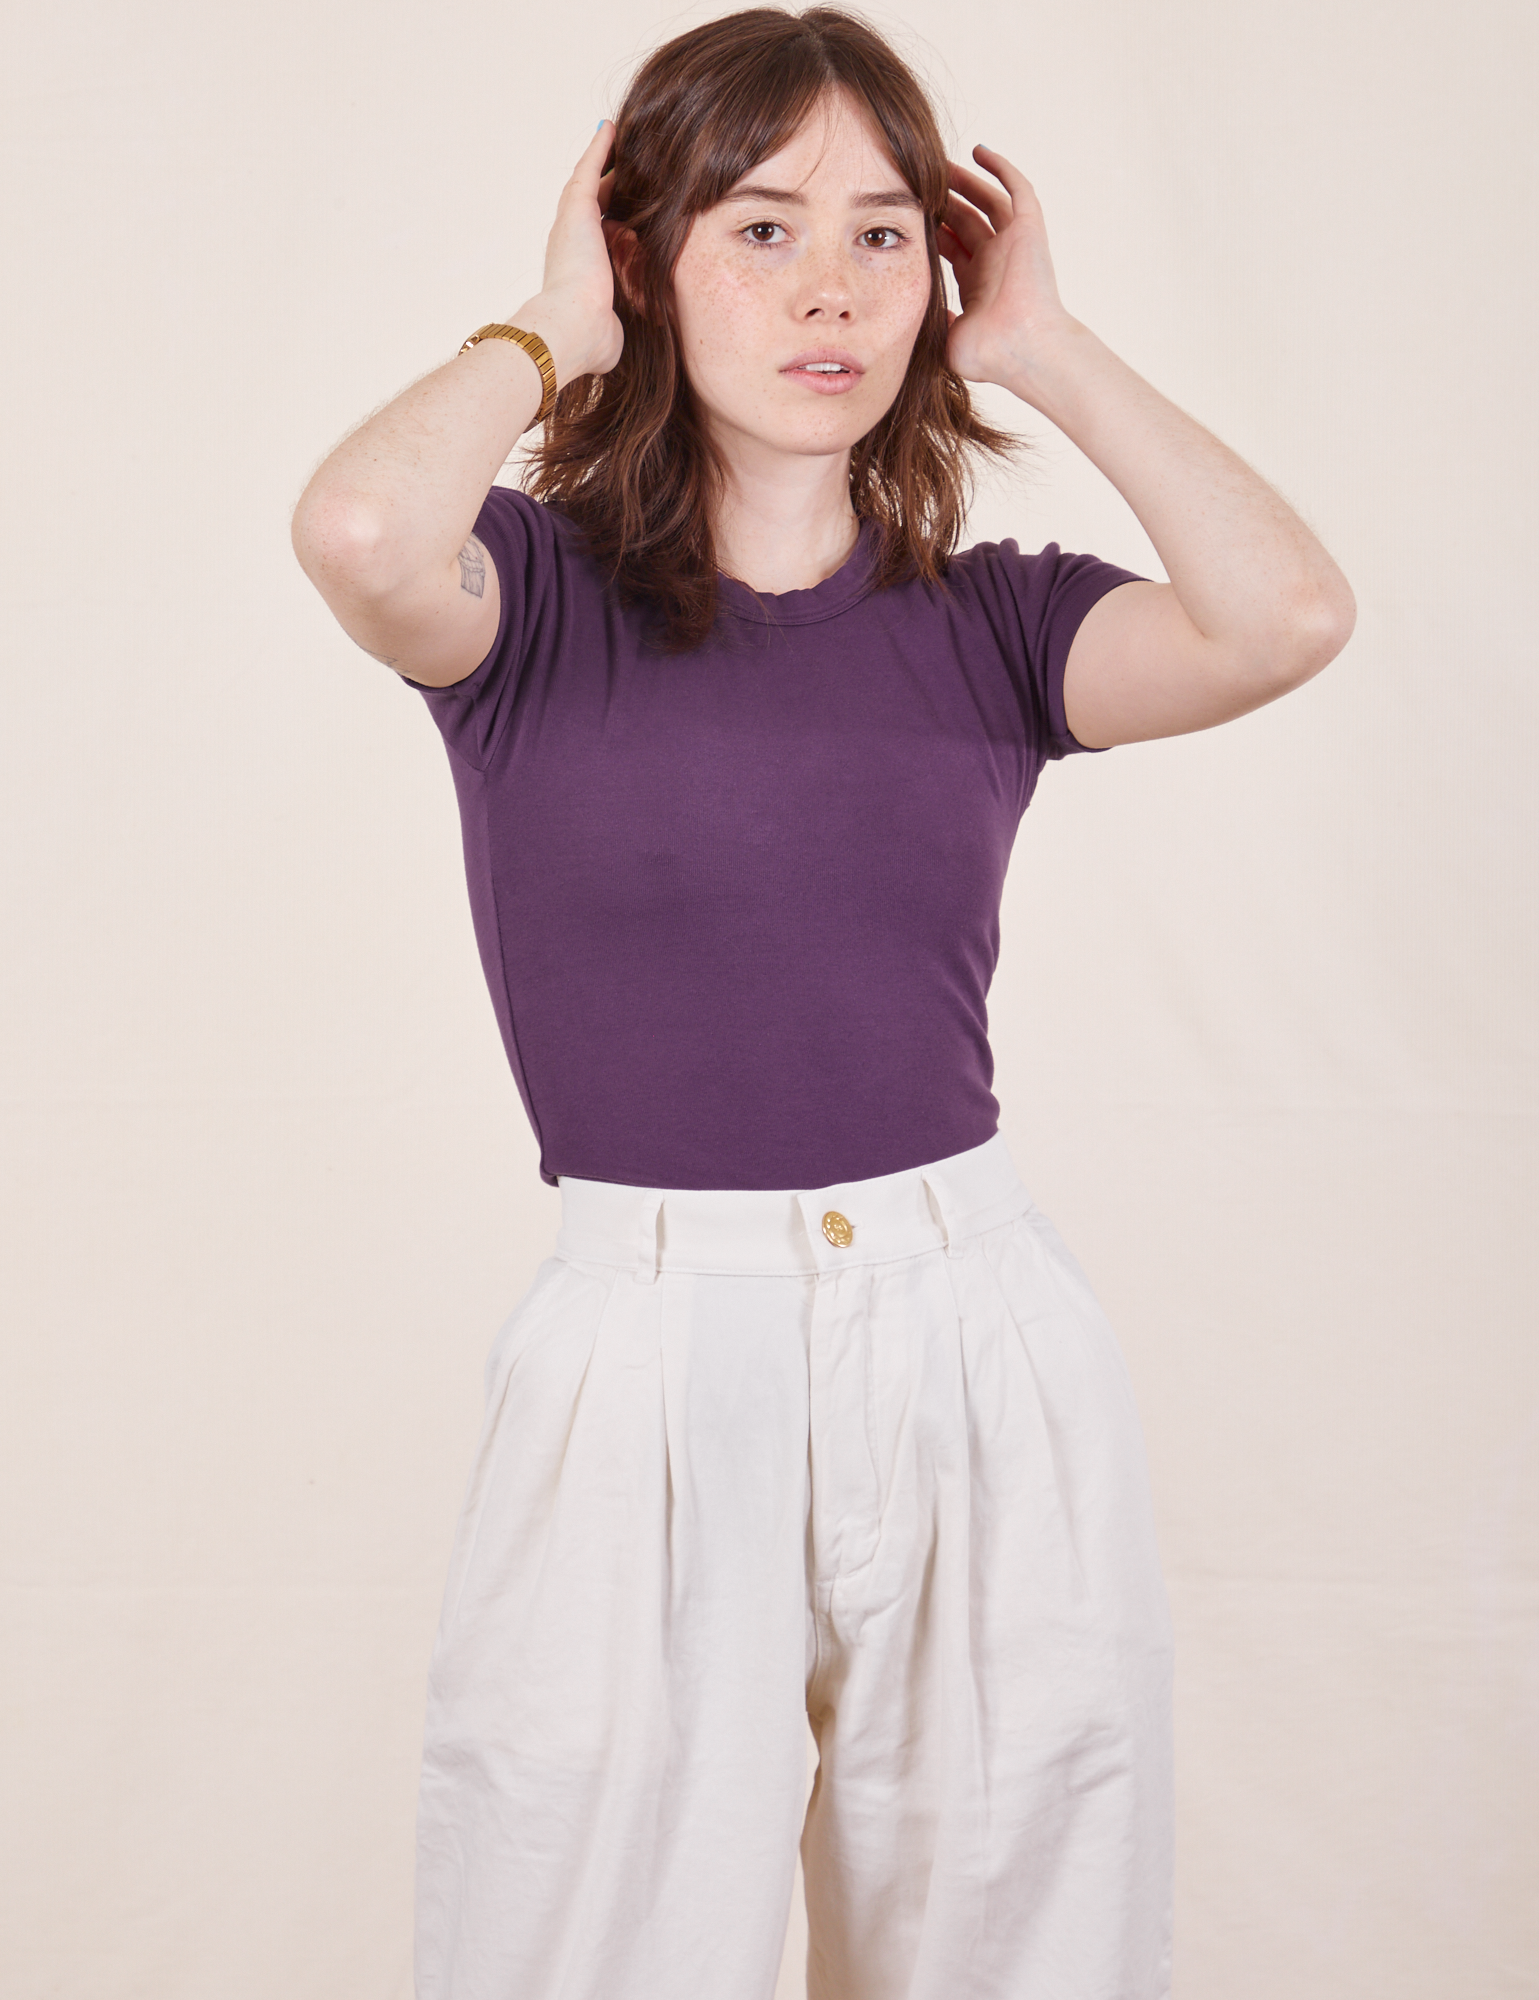 Hana is wearing Baby Tee in Nebula Purple and vintage off-white Trousers